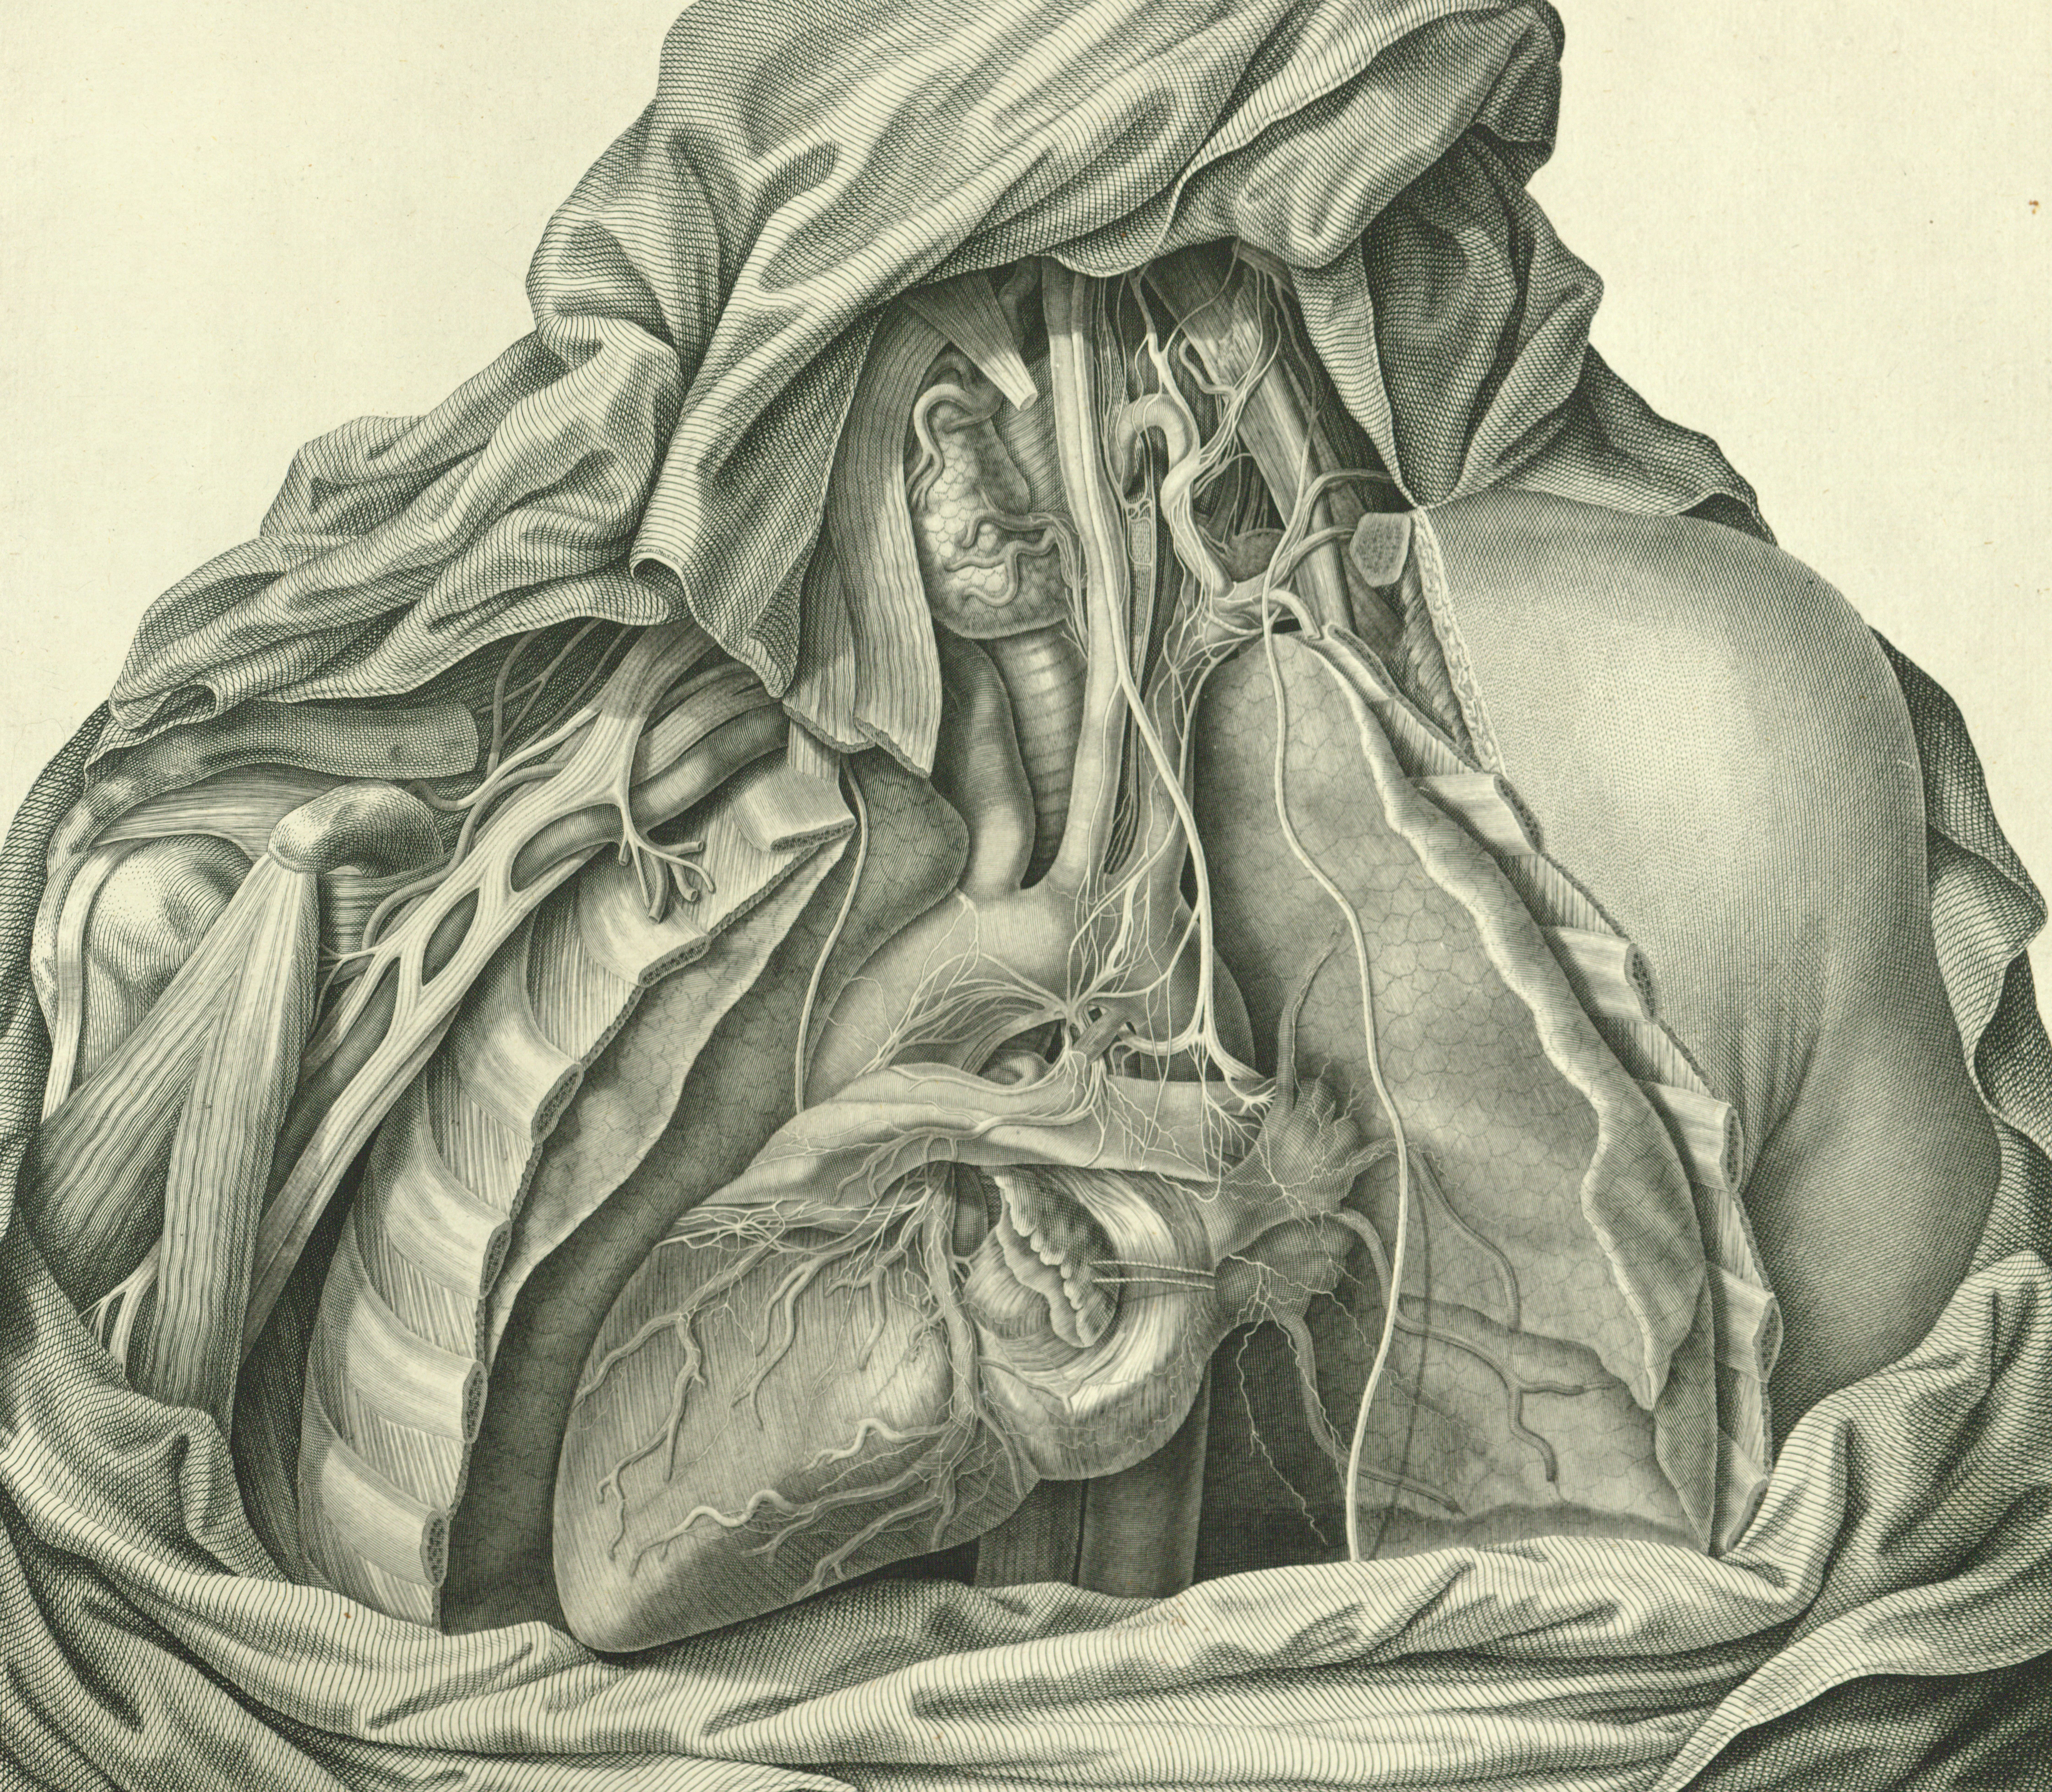 Artist rendition of a human chest with anatomical heart showing through ribs with cloth drapings.